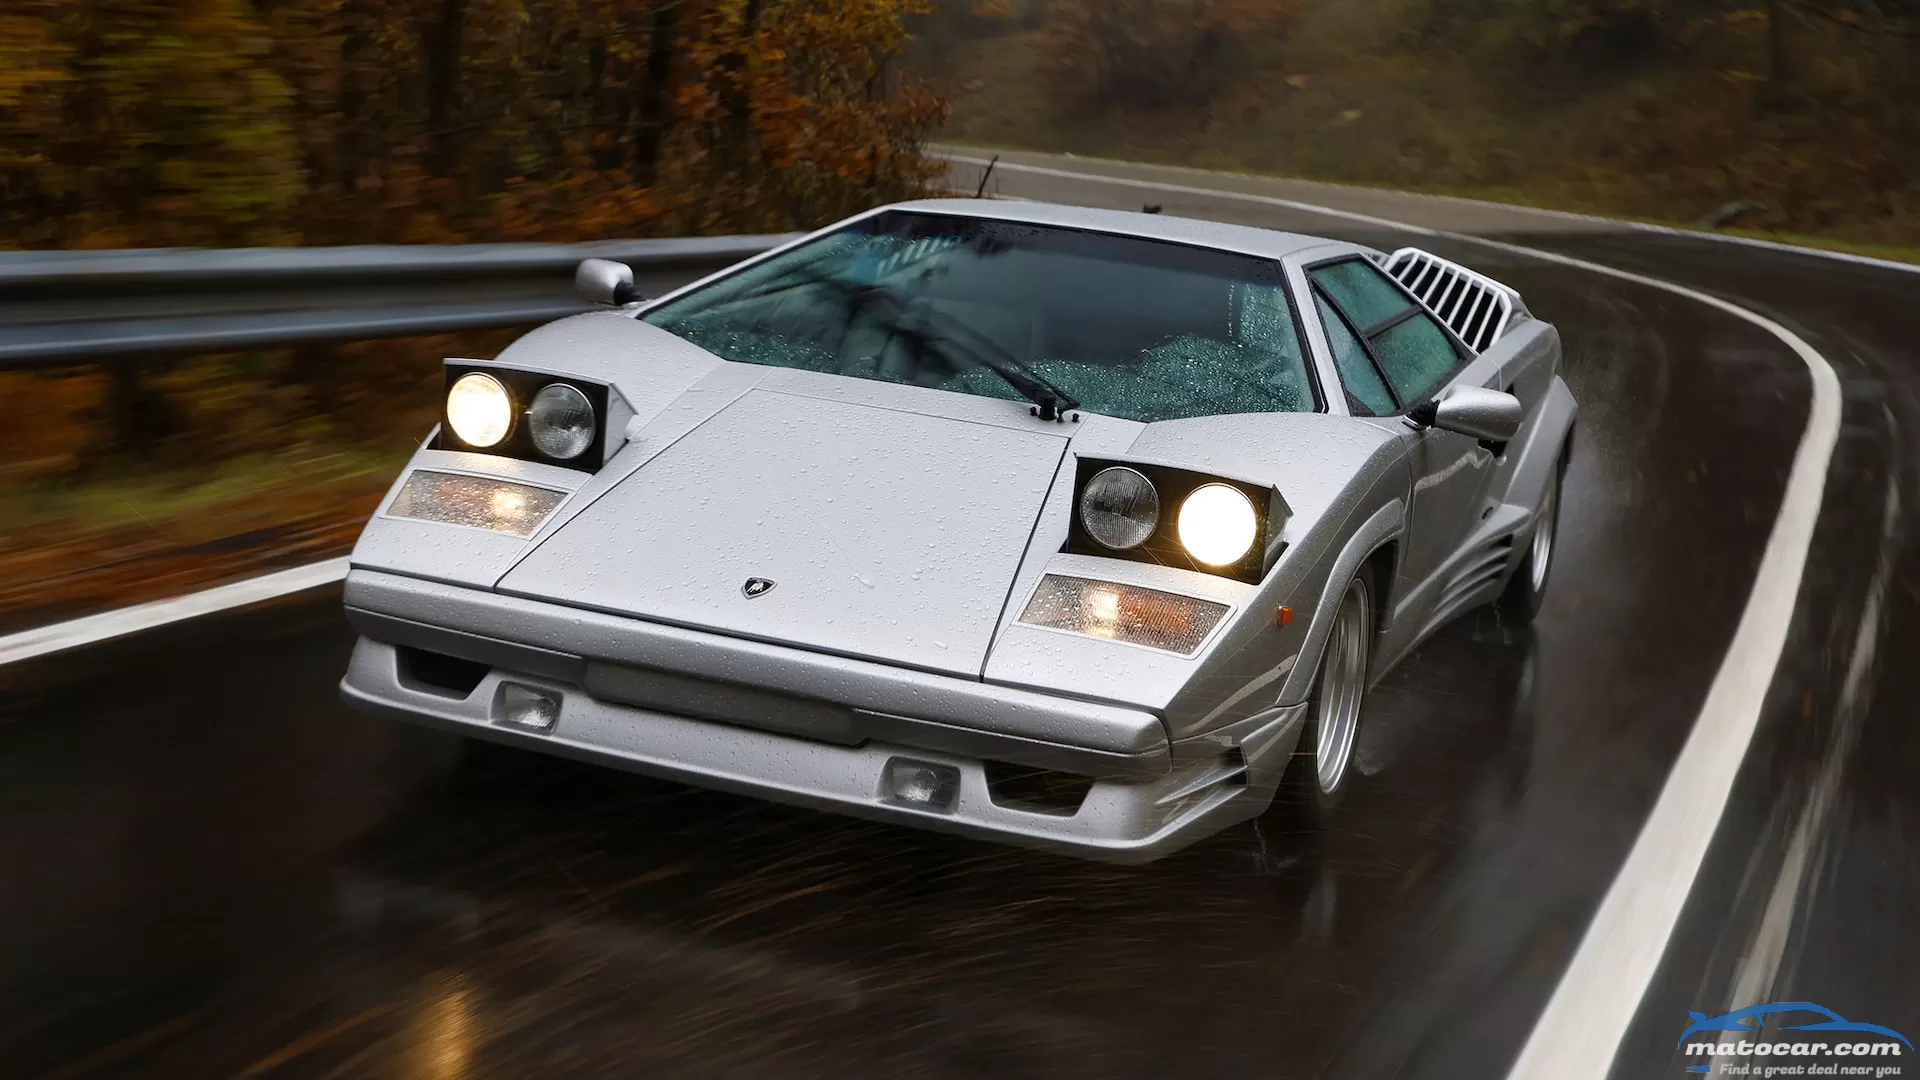 Driving the Final Lamborghini Countach: There’s Still Nothing Else Like it